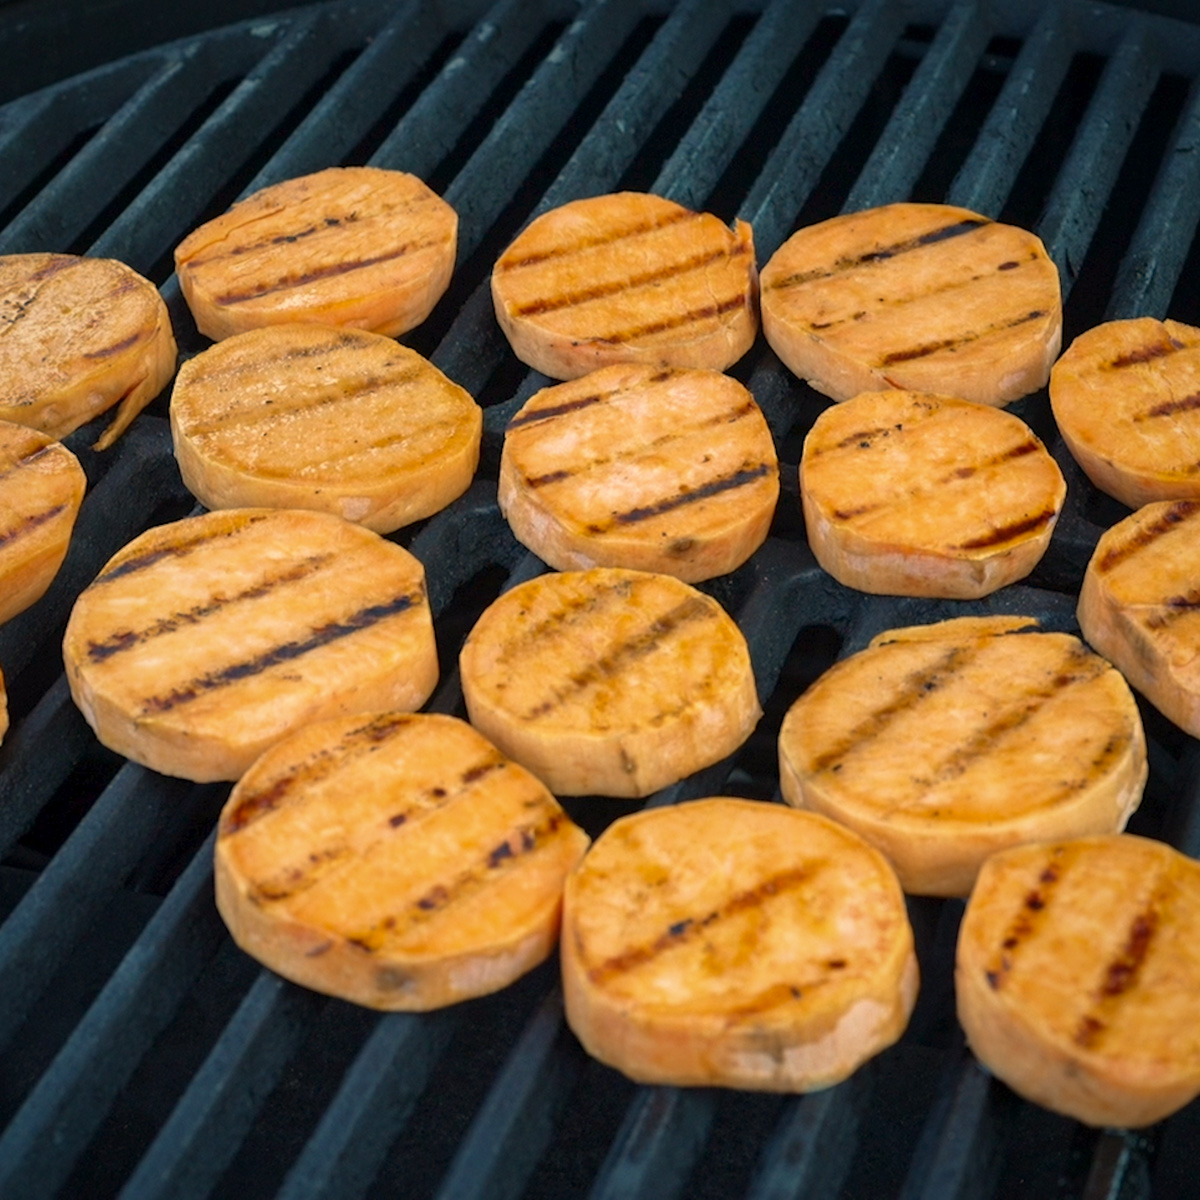 Grill the sweet potatoes on a hot grill.